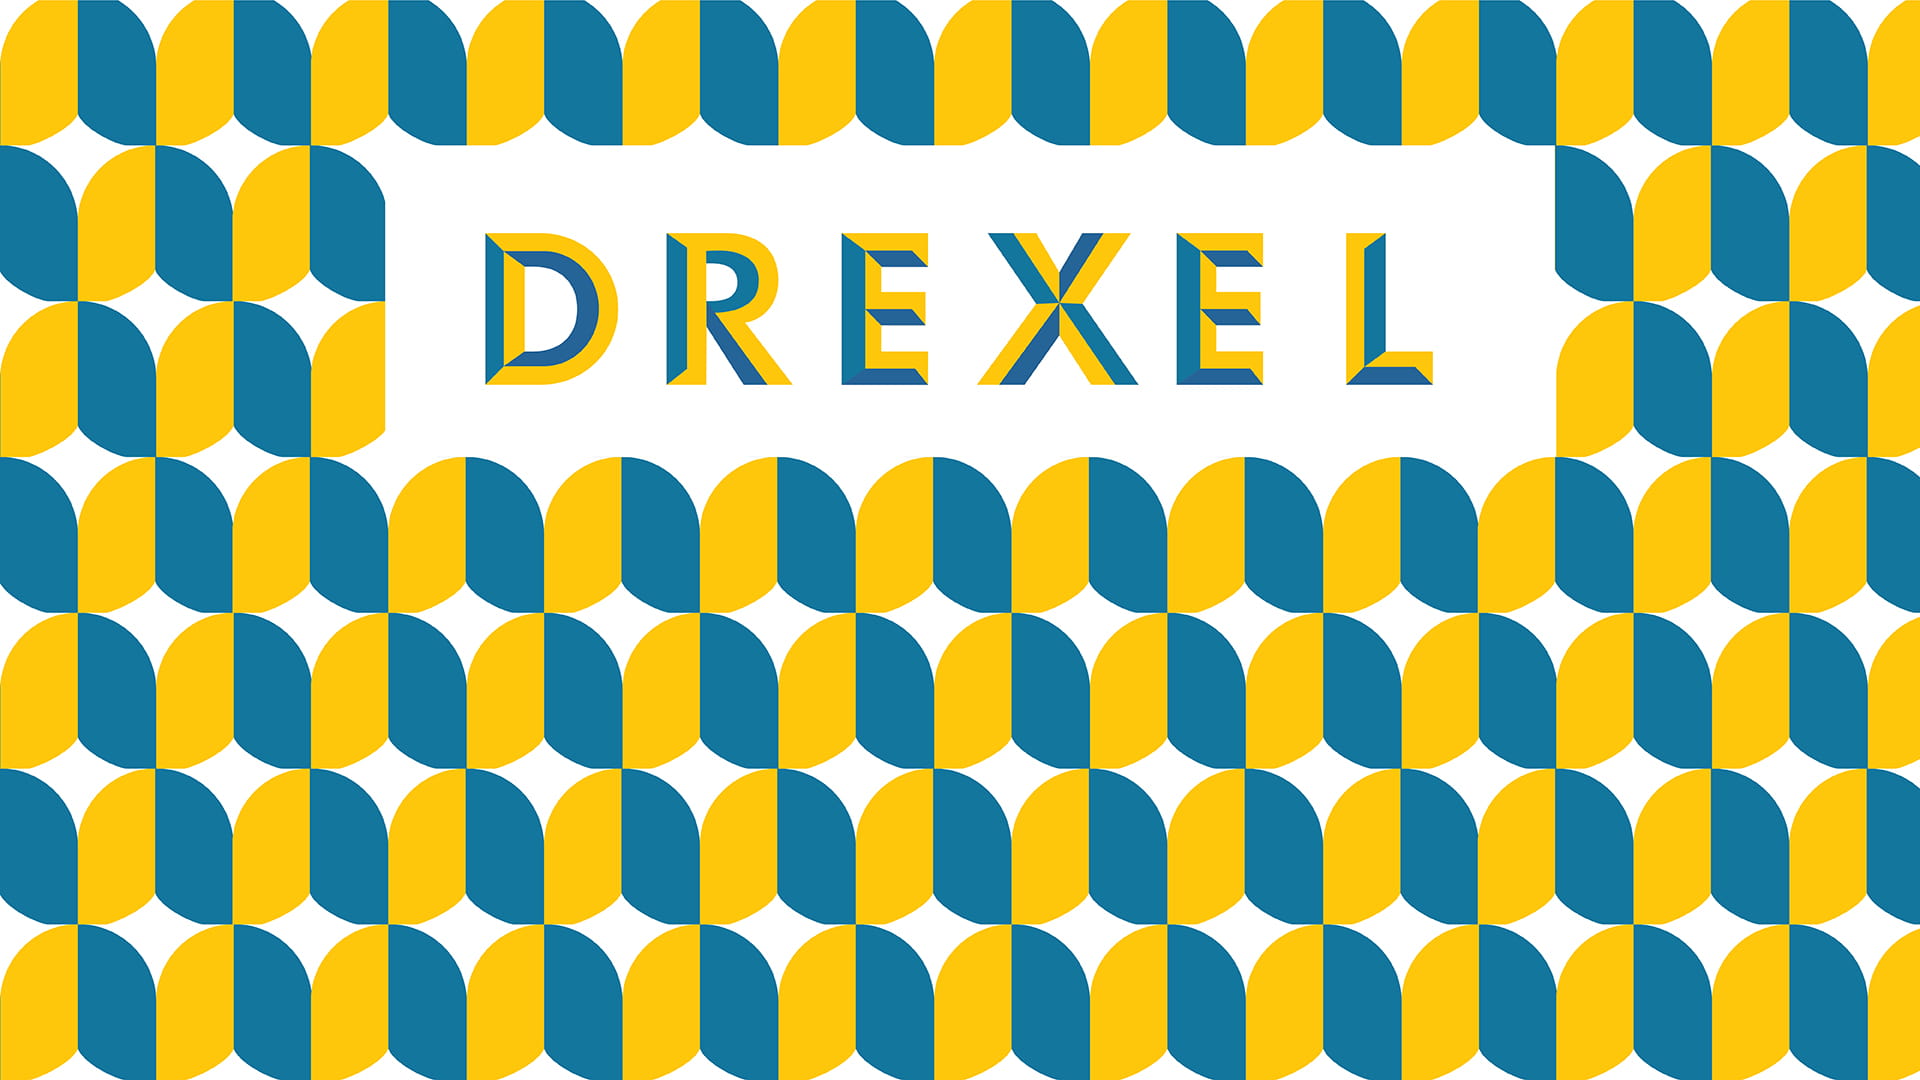 Dragon scales graphical design with the word 'Drexel.'